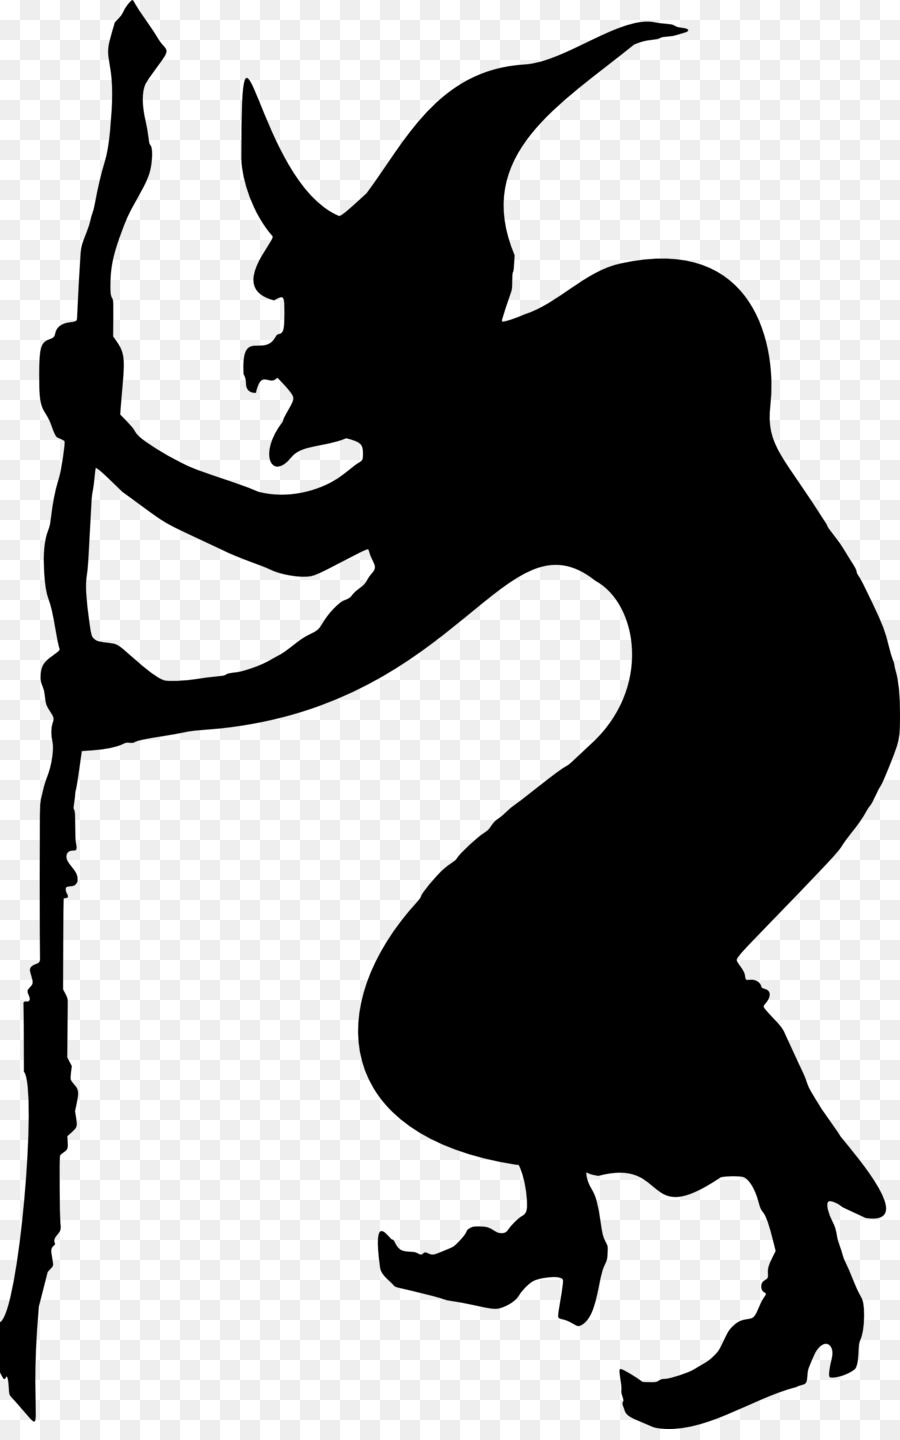 Witchcraft Shadow play Silhouette Clip art - Witch png download - 2016*3200 - Free Transparent Witchcraft png Download.